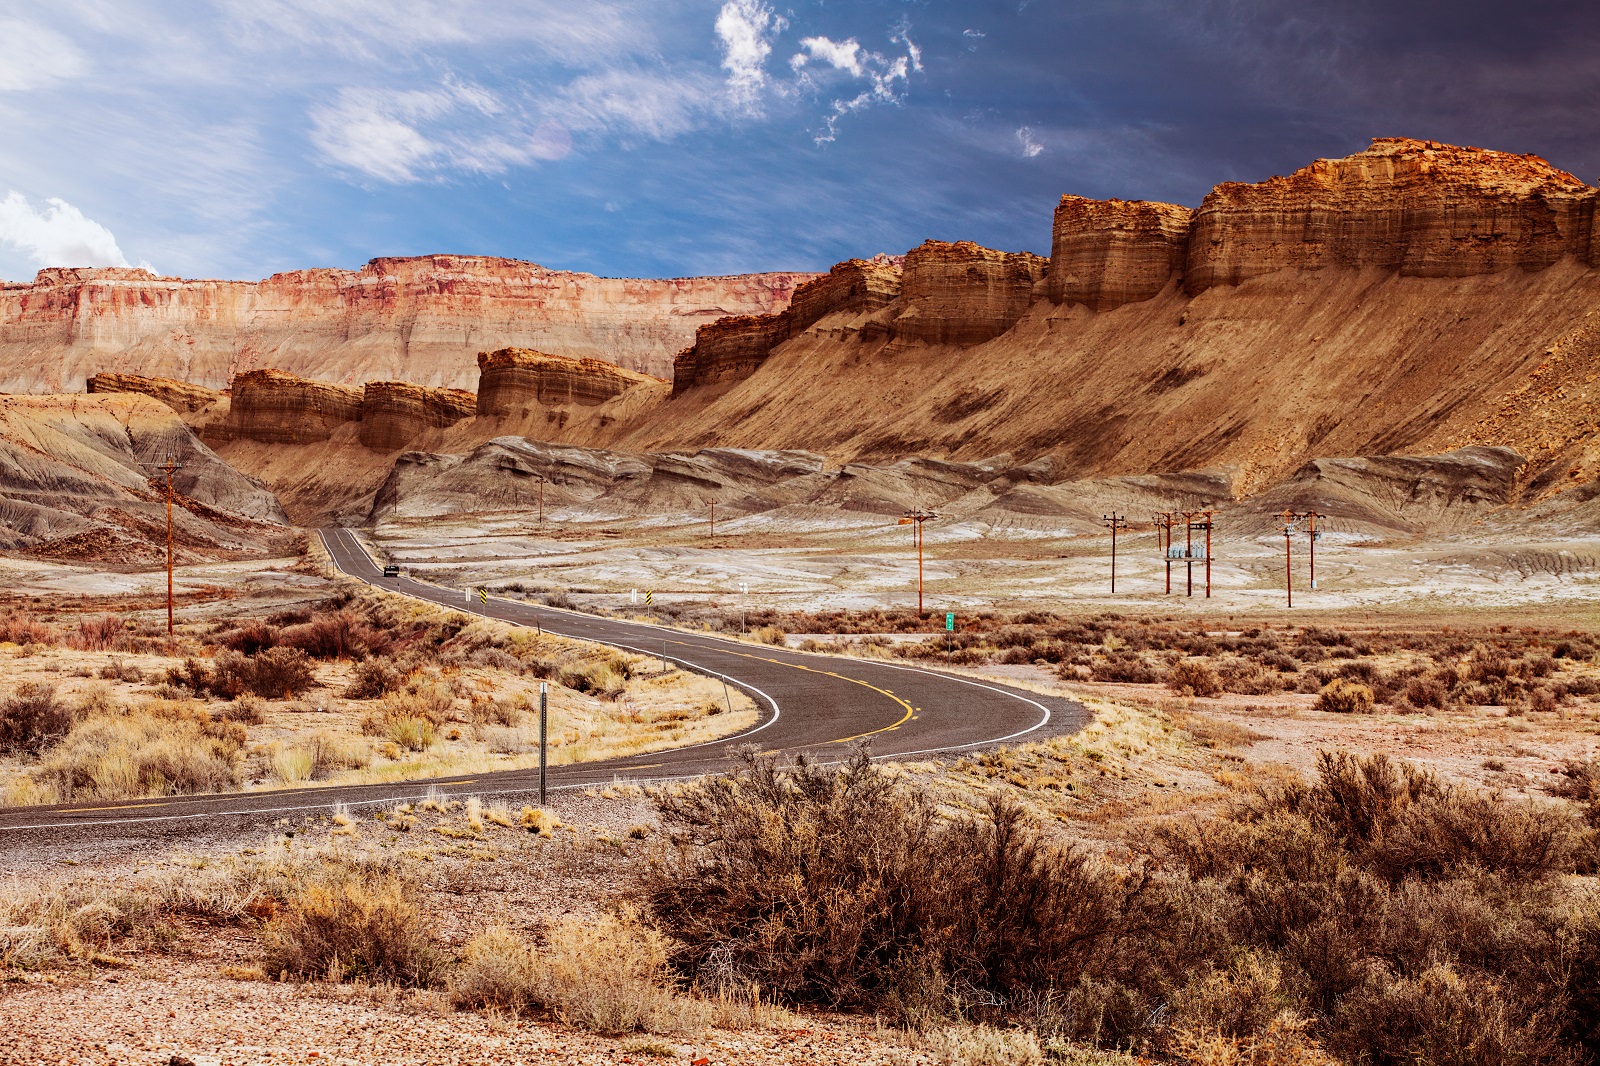 <p class="wp-caption-text">Image Credit: Shutterstock / benemale</p>  <p><span>Experience the wonders of southern Utah on Route 12, a scenic highway that passes through some of the state’s most iconic national parks and monuments. From red rock canyons to towering mesas, it’s a road trip that showcases the natural beauty of the American West.</span></p>